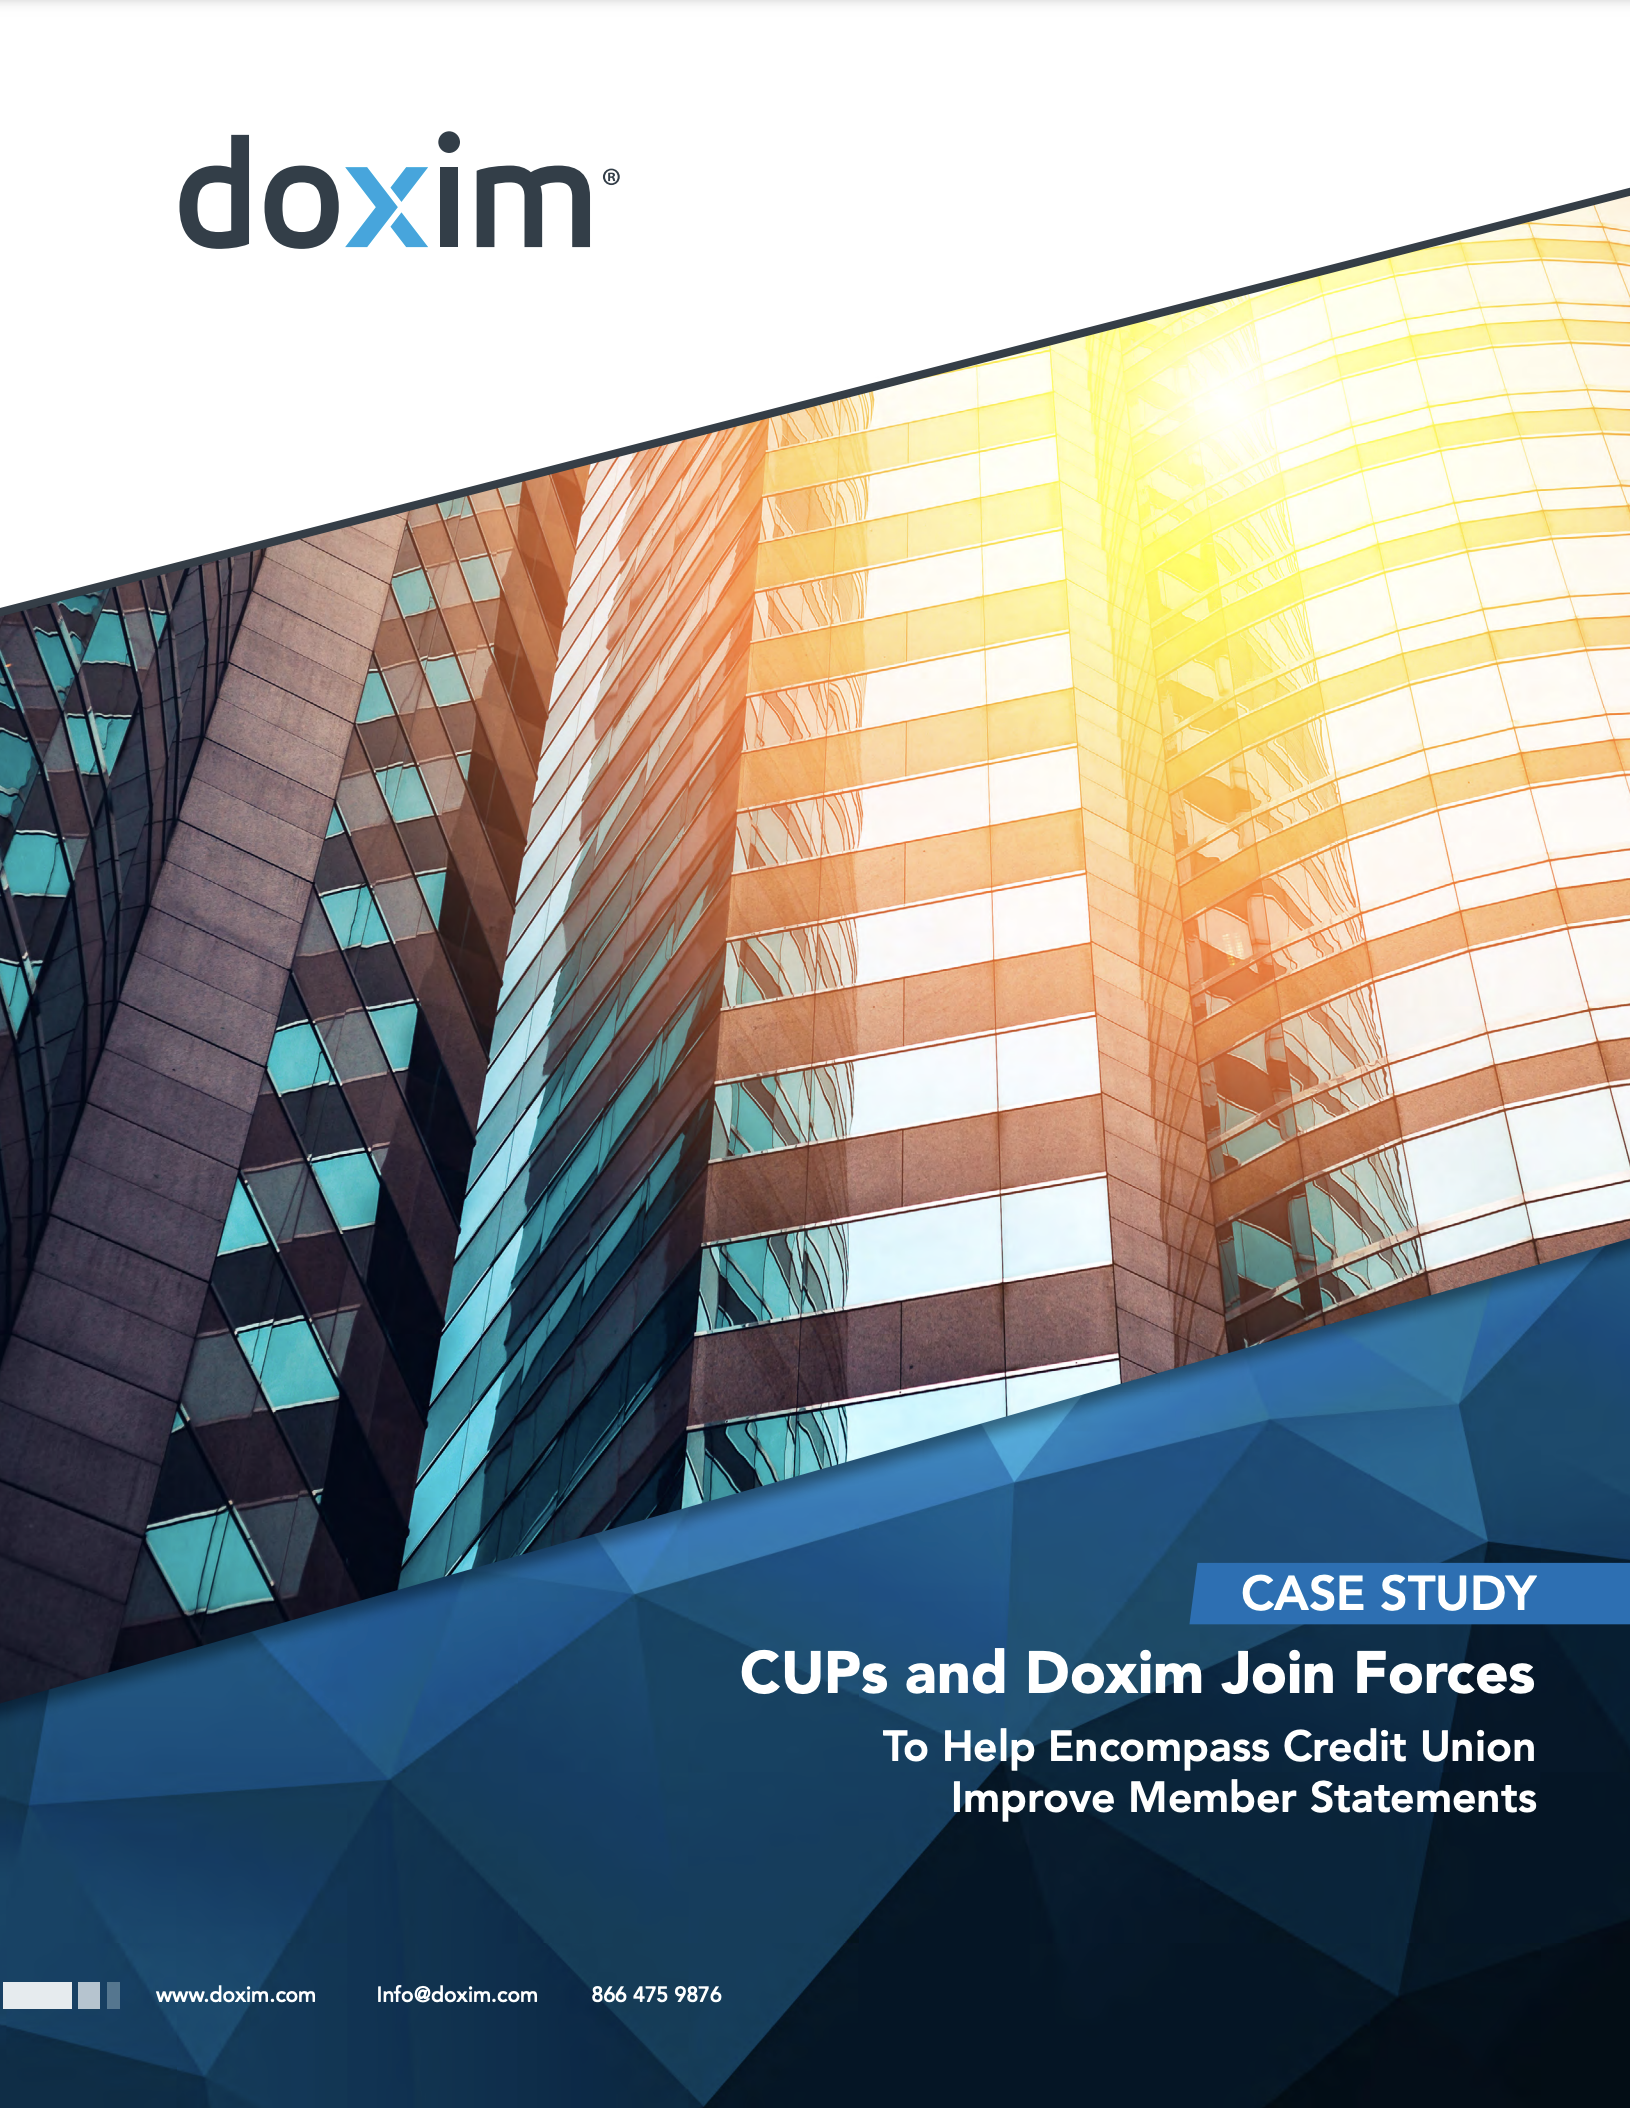 Case study: CUPs and Doxim Join Forces To Help Encompass Credit Union Improve Member Statements